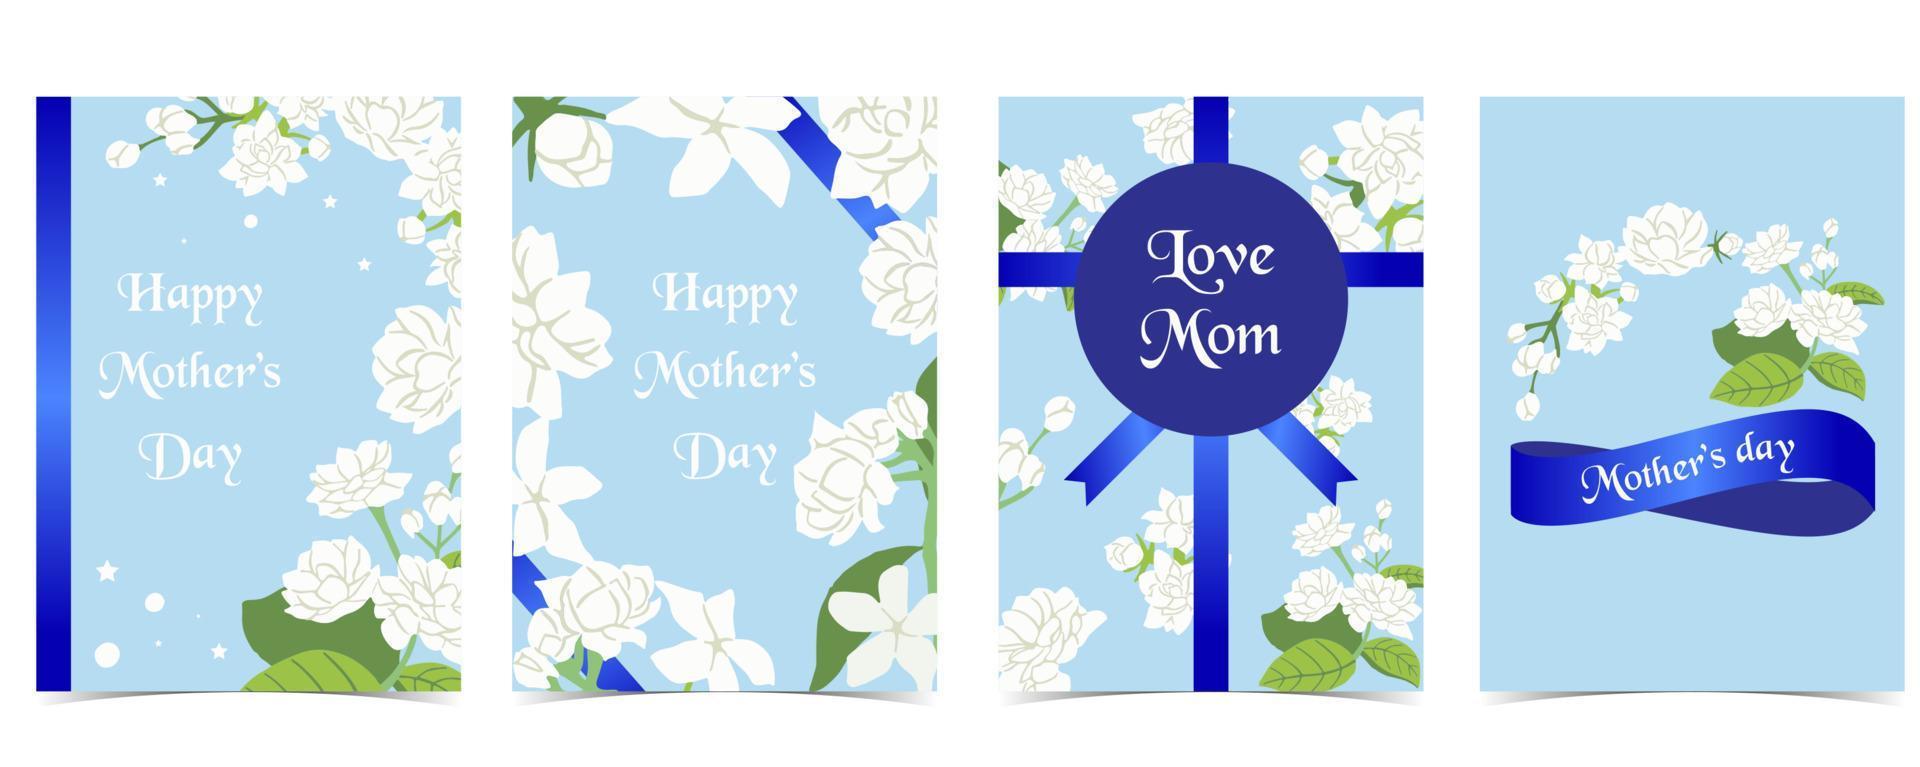 mother's day invitation with jasmine vector